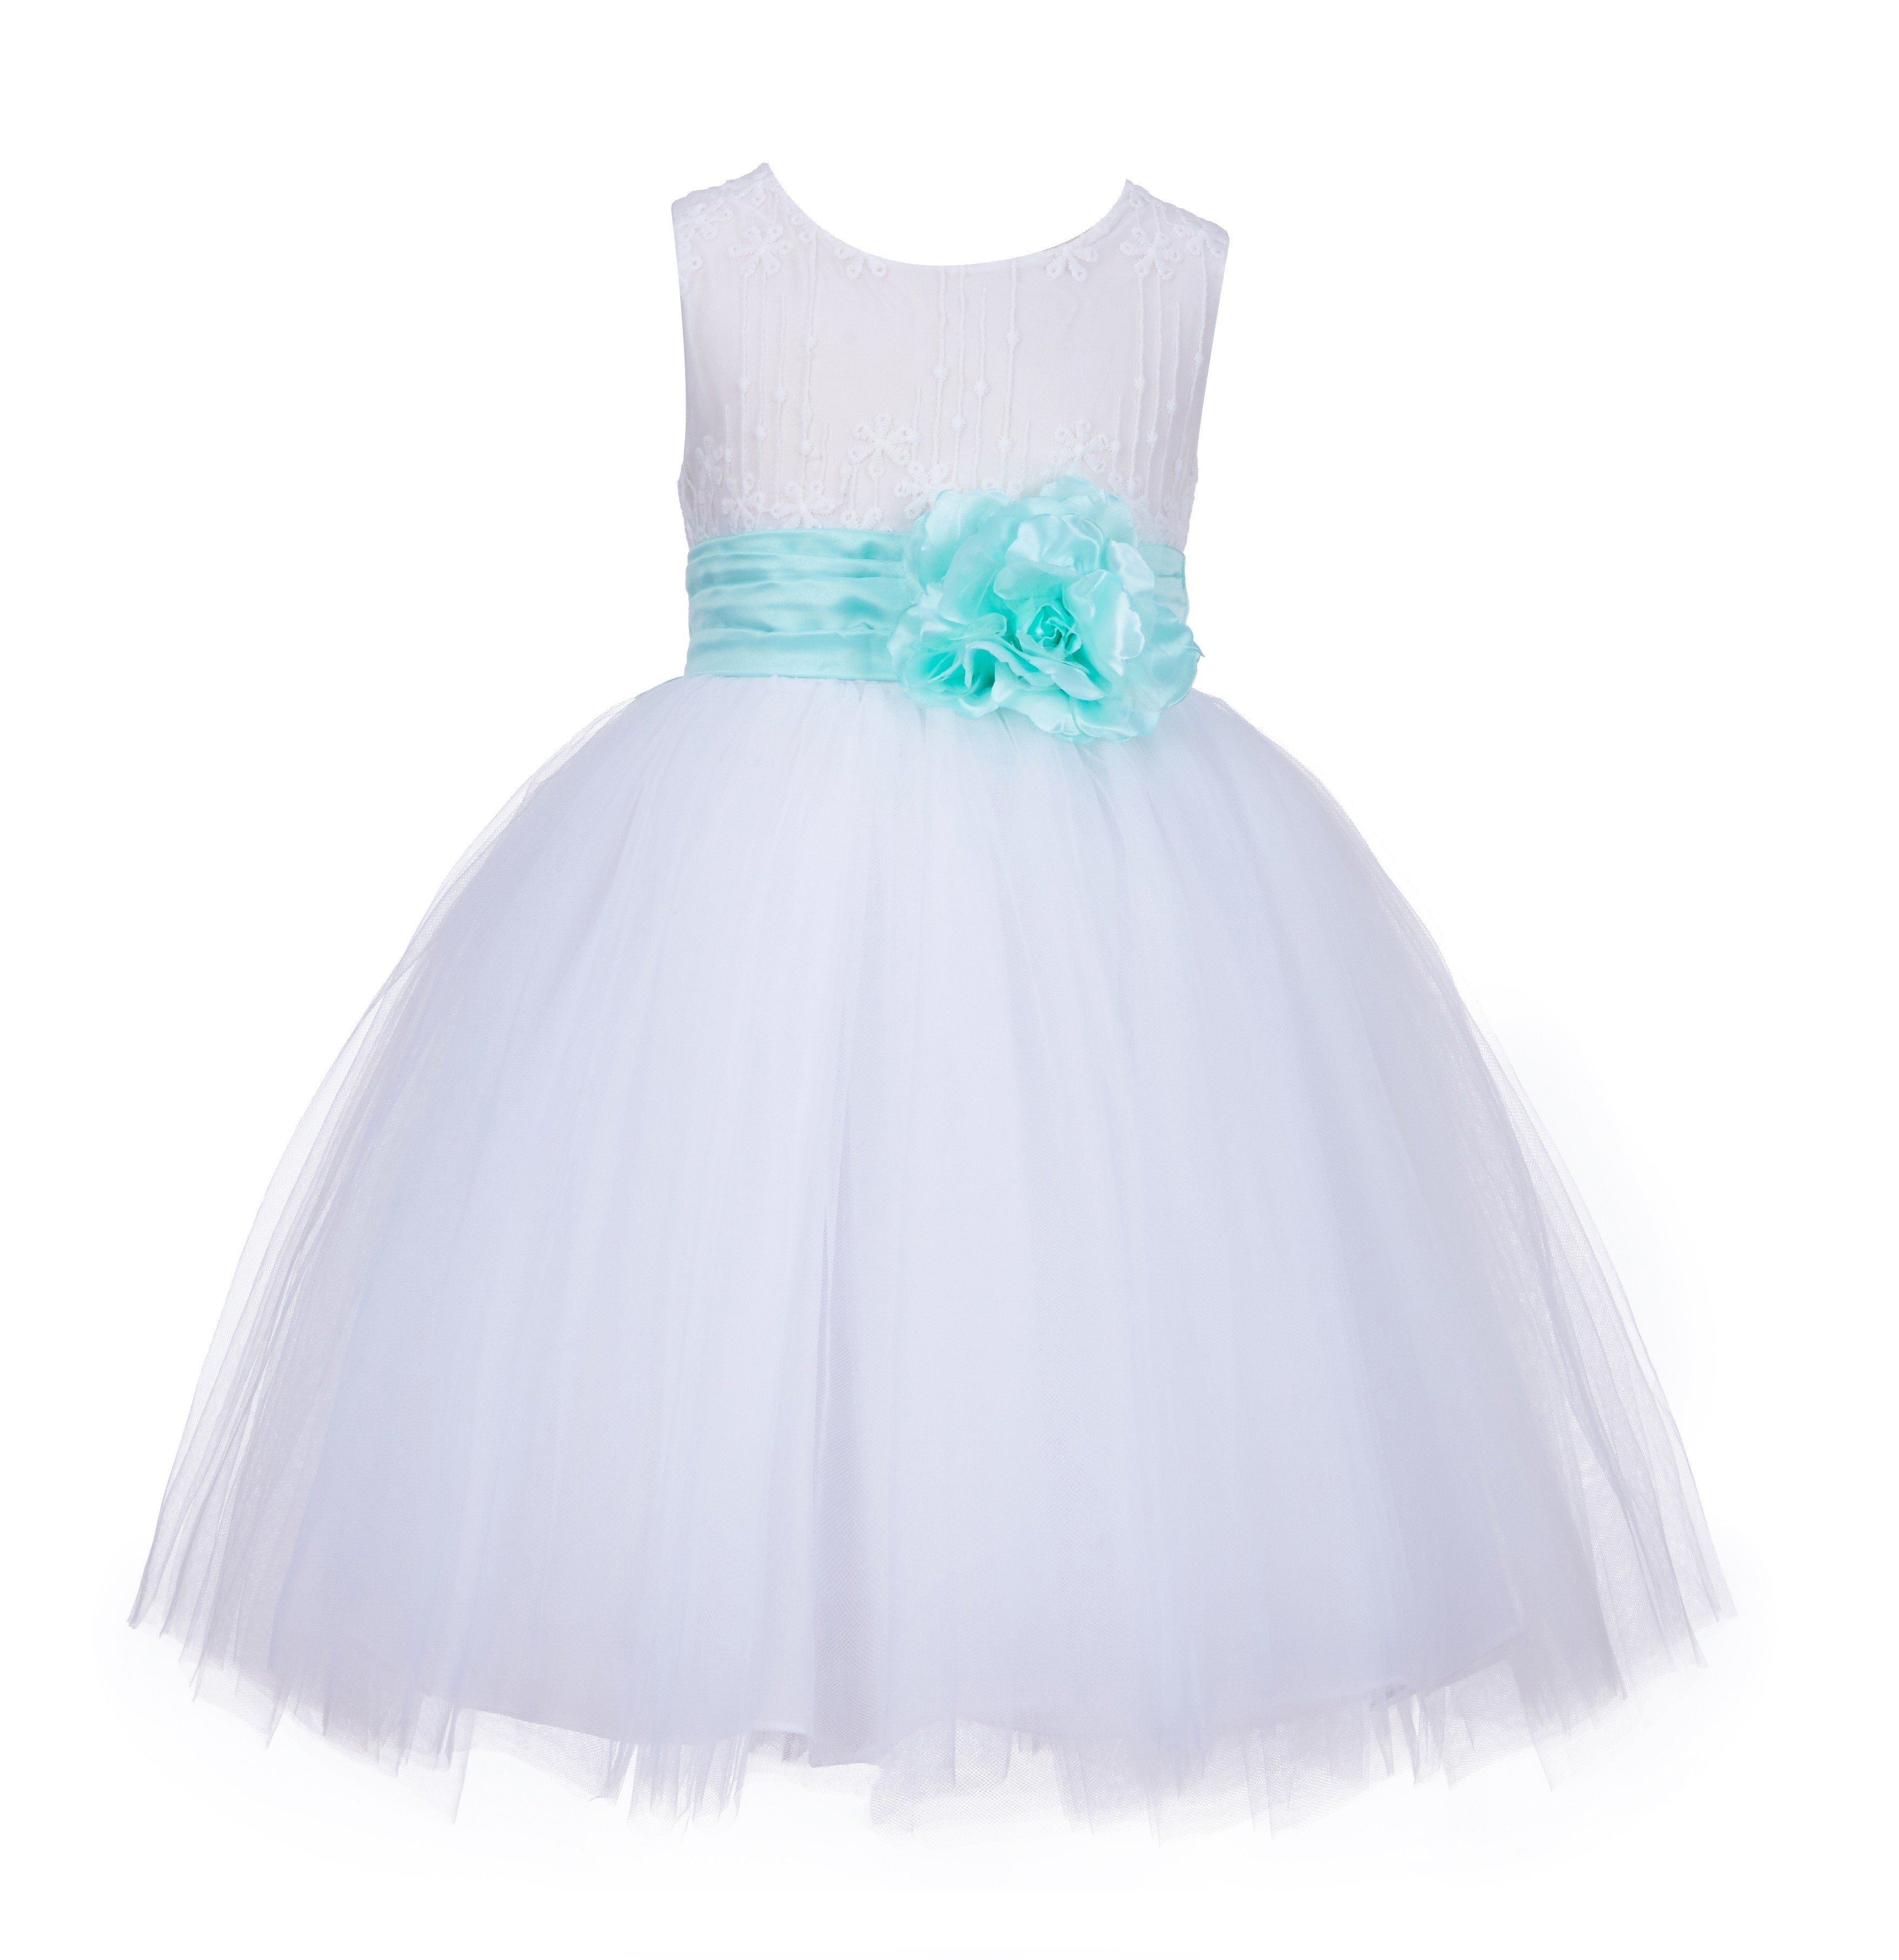 White/Mint Lace Embroidery Tulle Flower Girl Dress Wedding 118